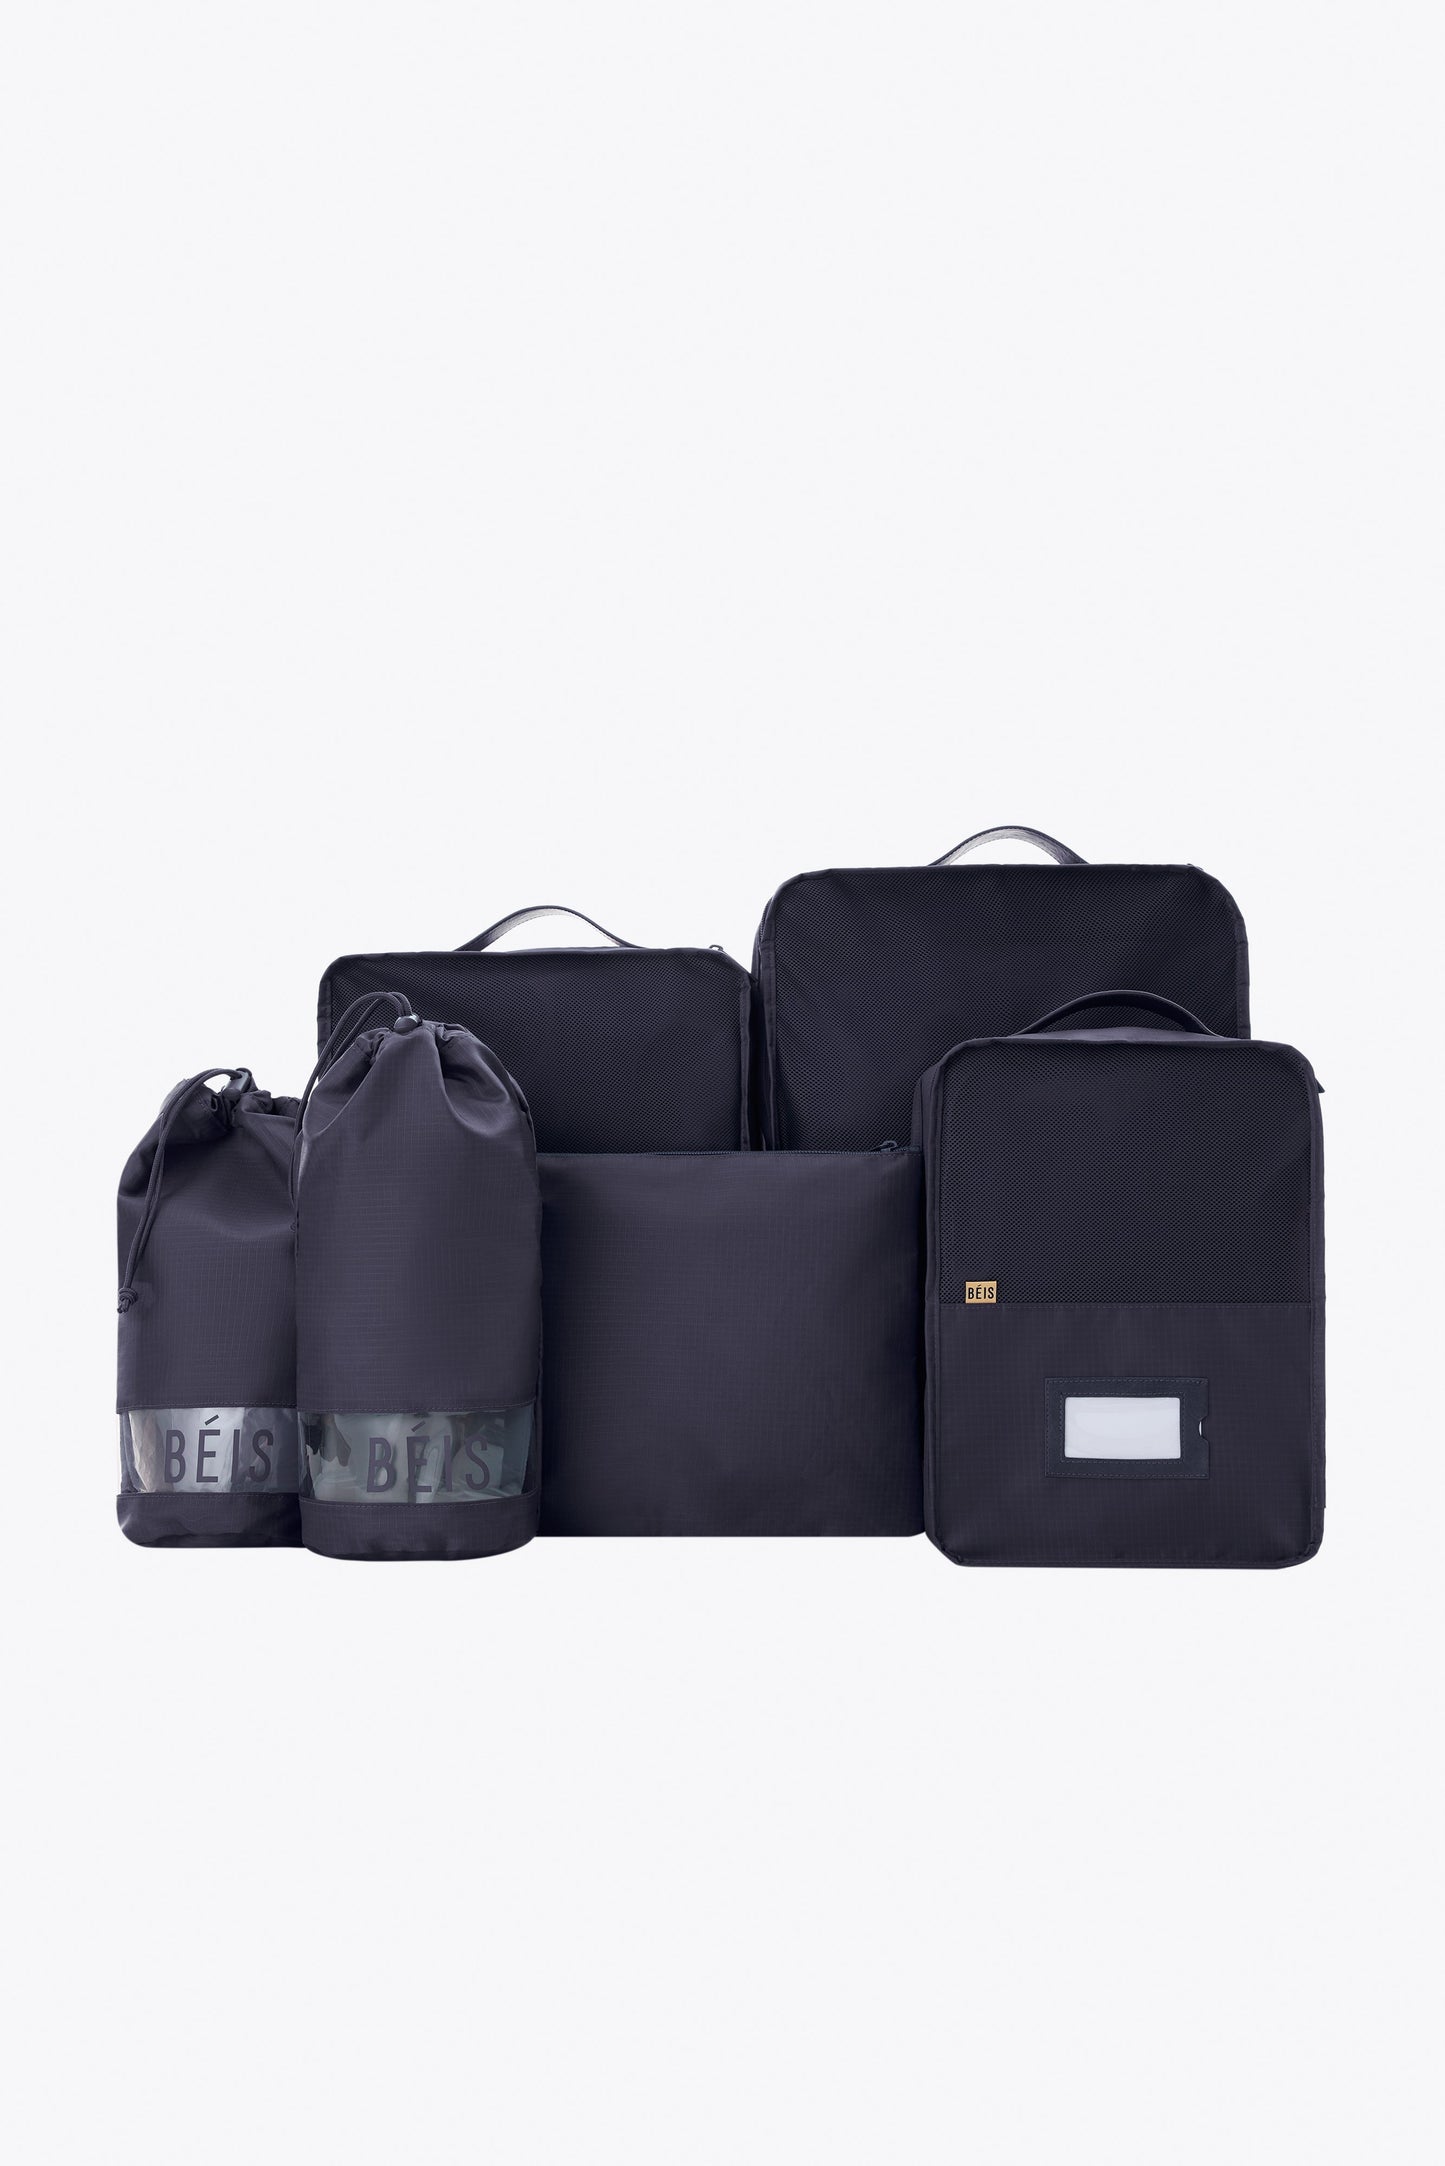 The Packing Cubes in Navy